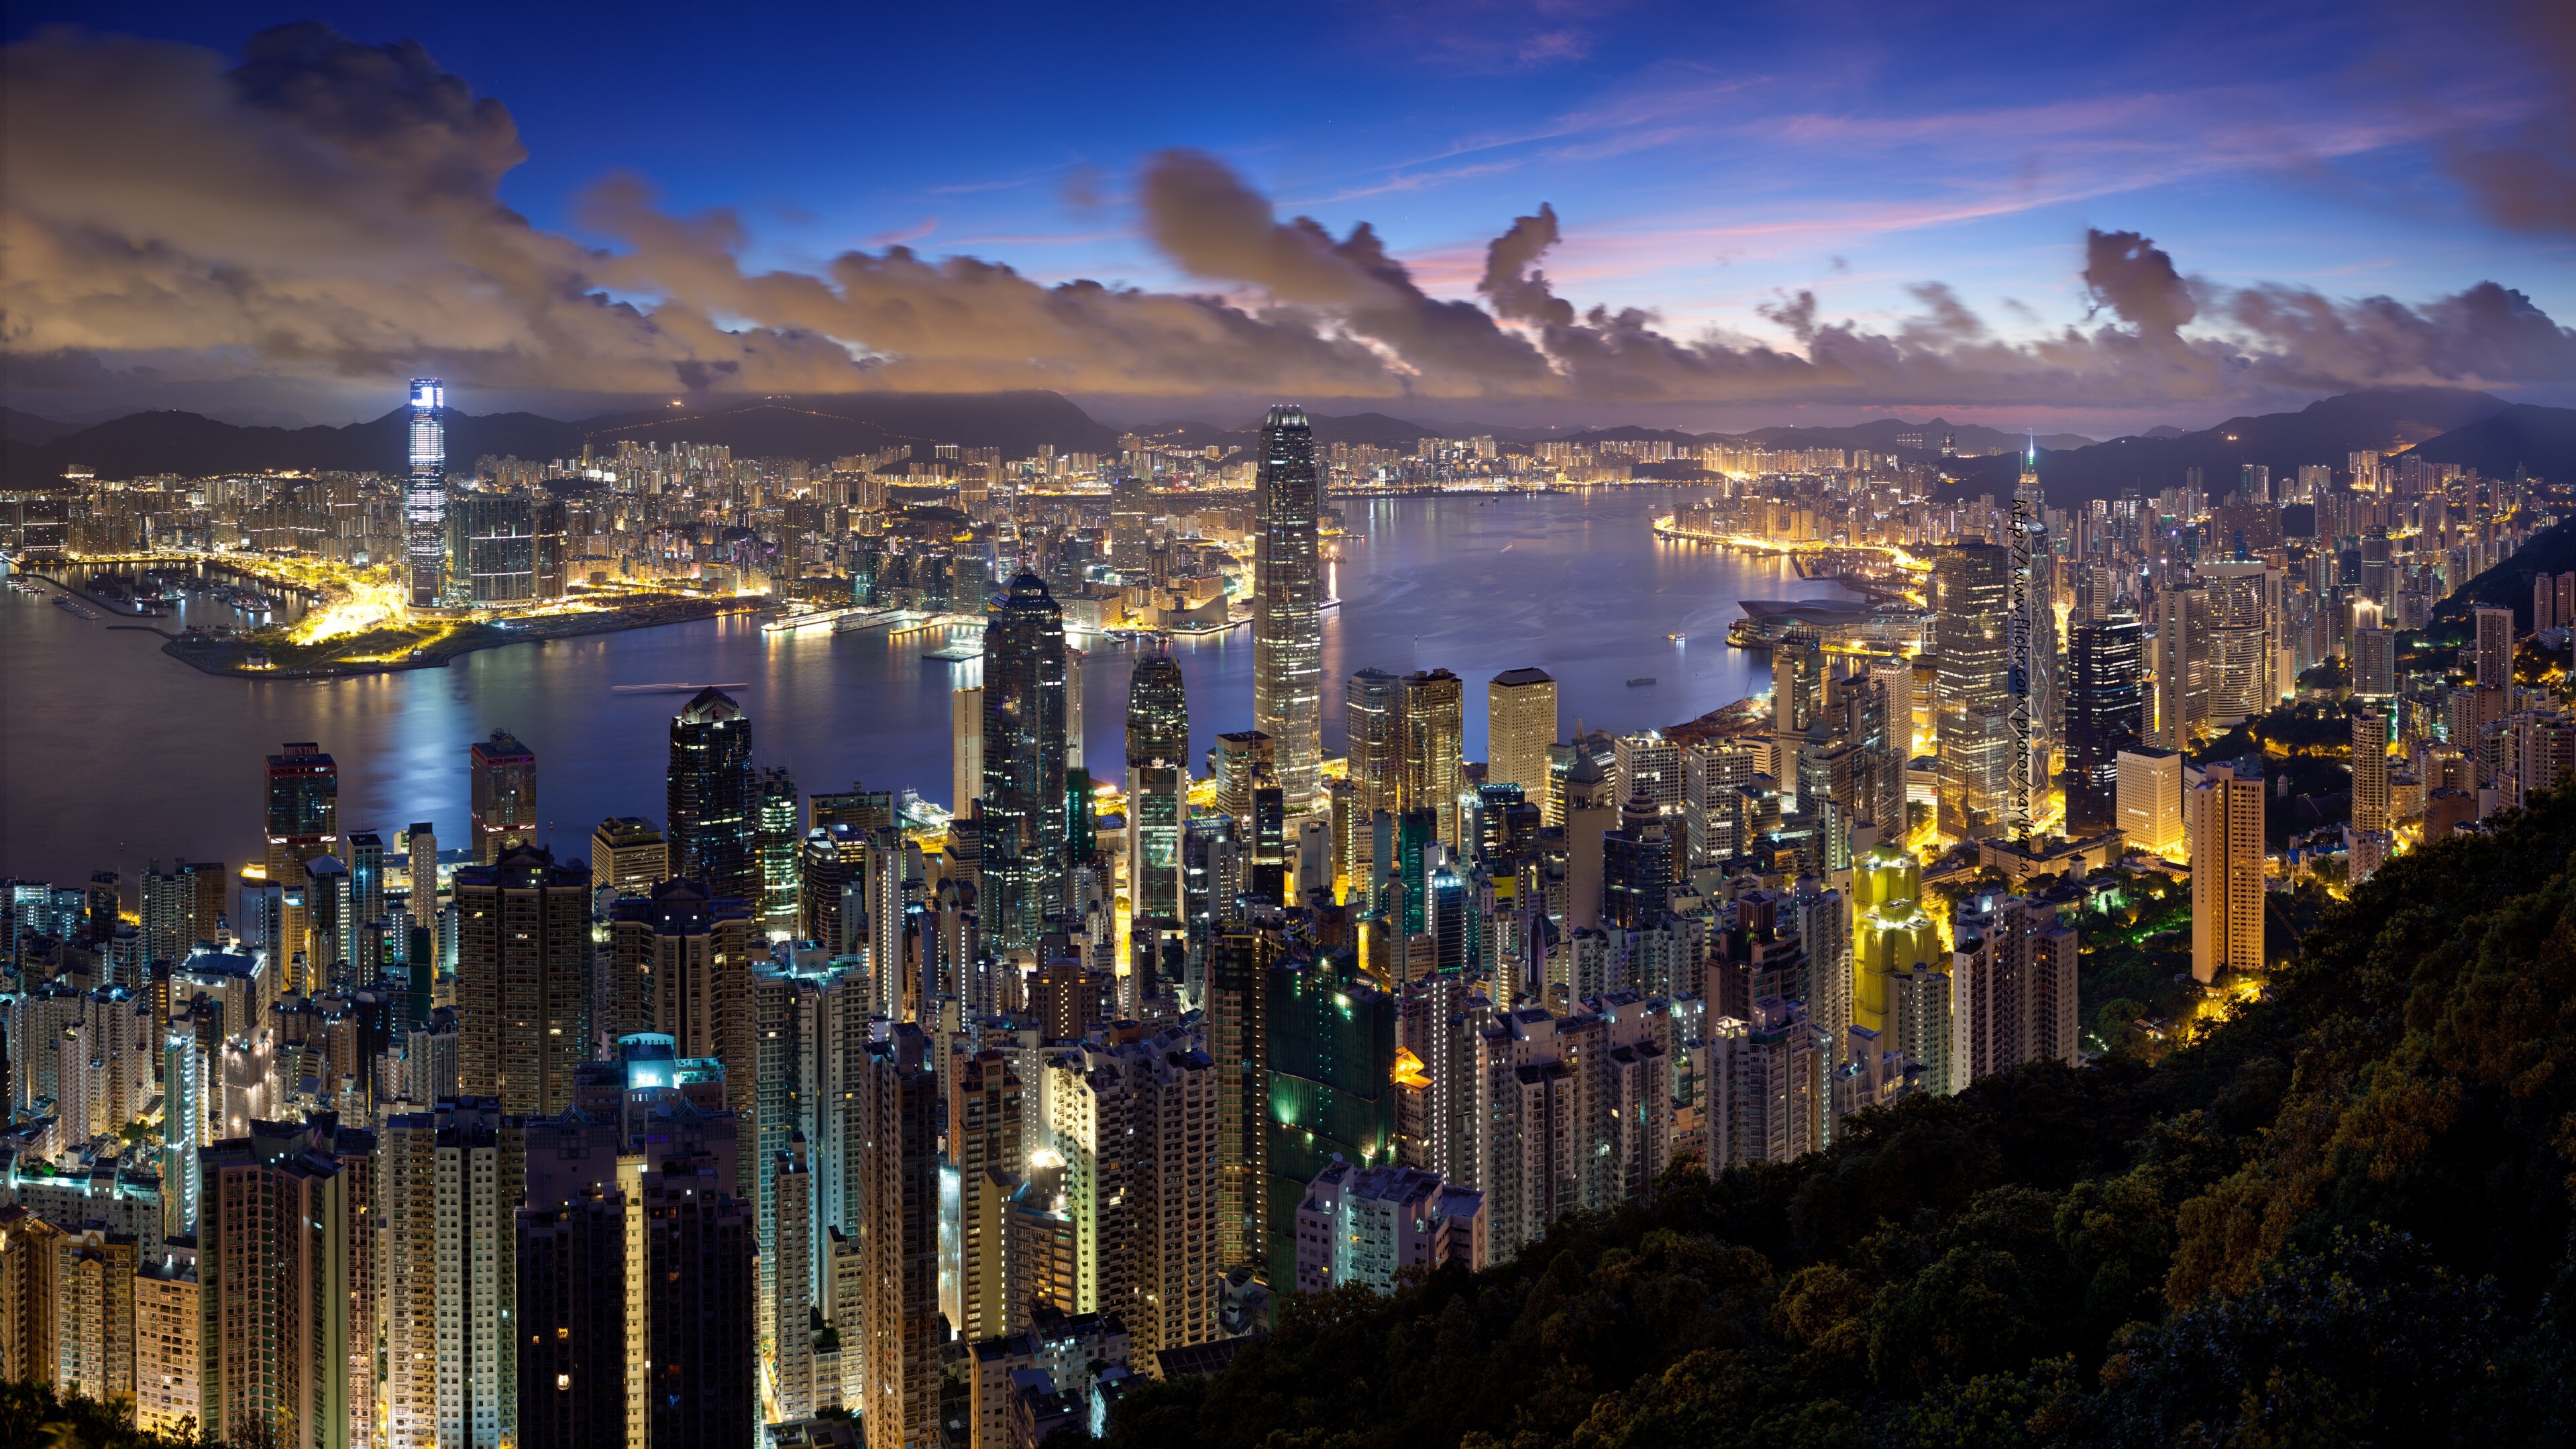 Hong Kong: Victoria Peak, A hill on the western half of the island. 3840x2160 4K Wallpaper.